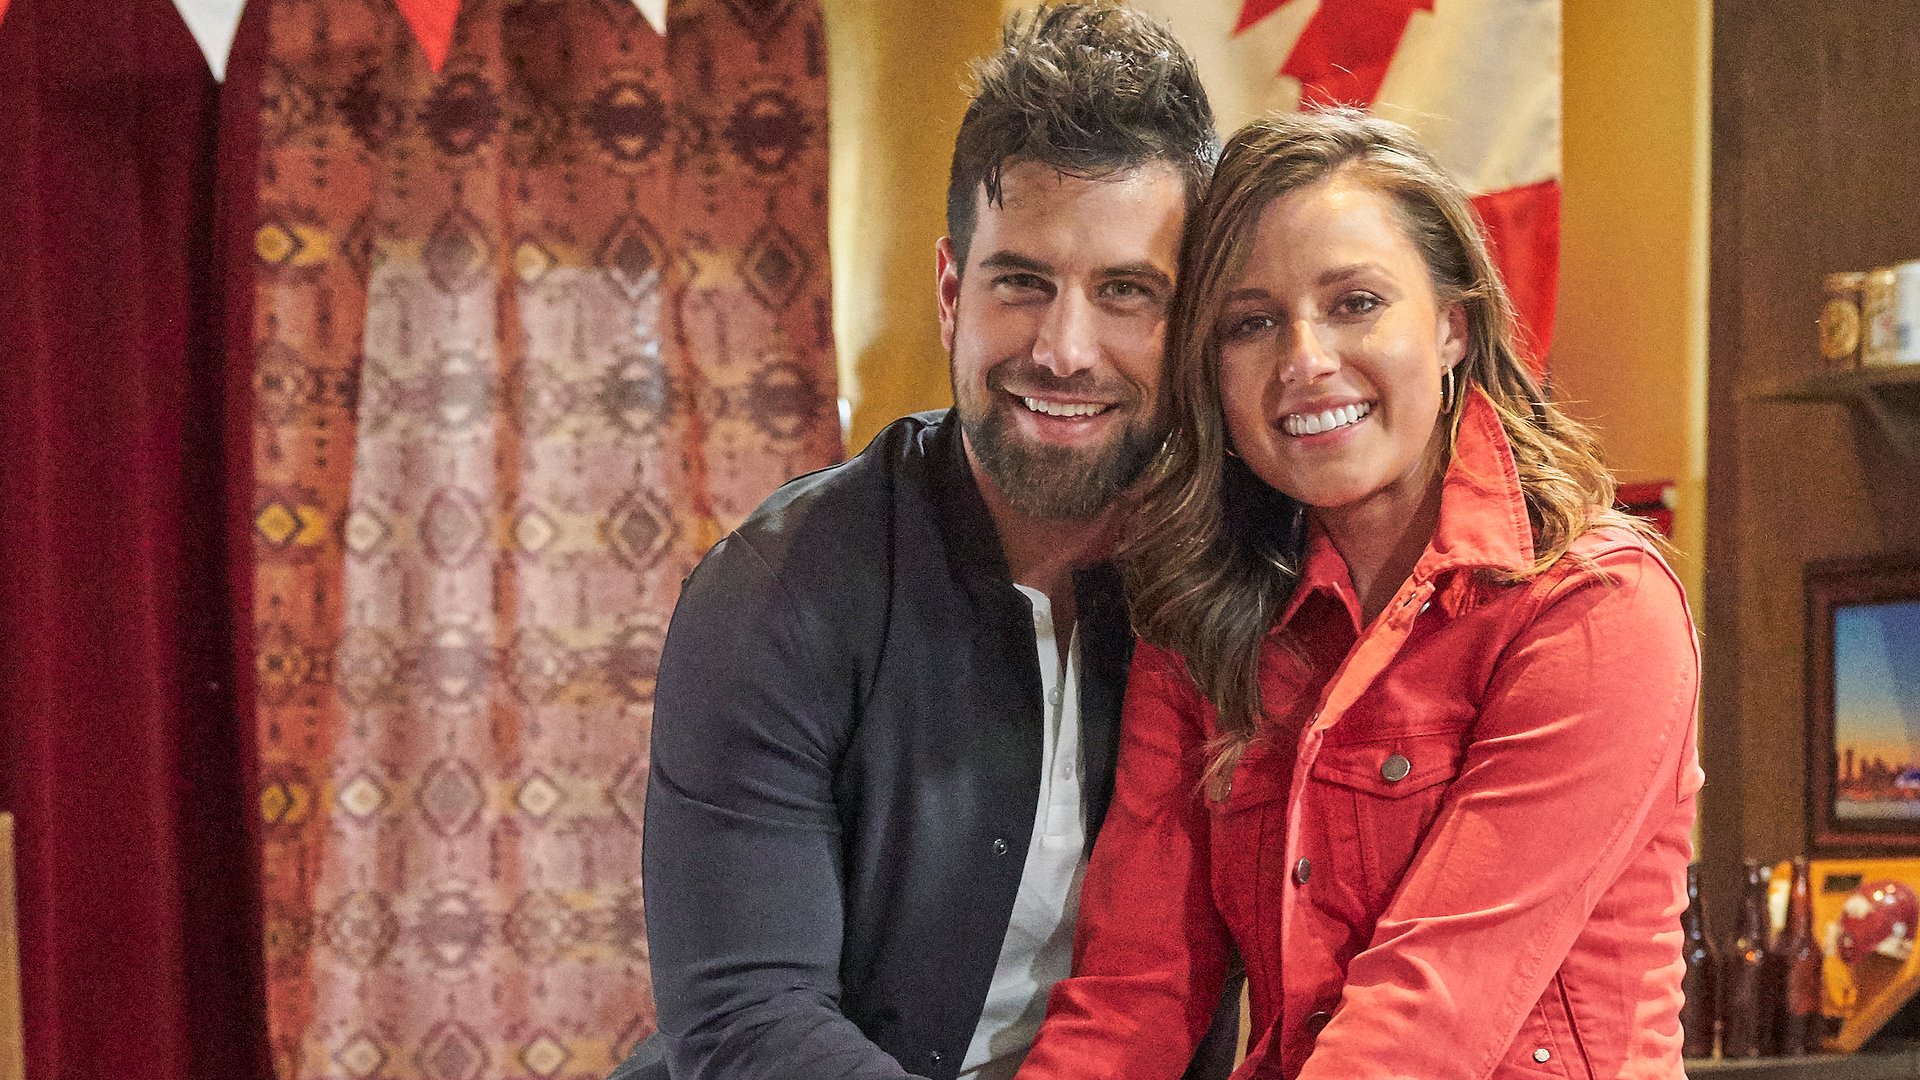 Blake Moynes and Katie Thurston pose together for their Hometown date in ‘The Bachelorette’ Season 17 Episode 9